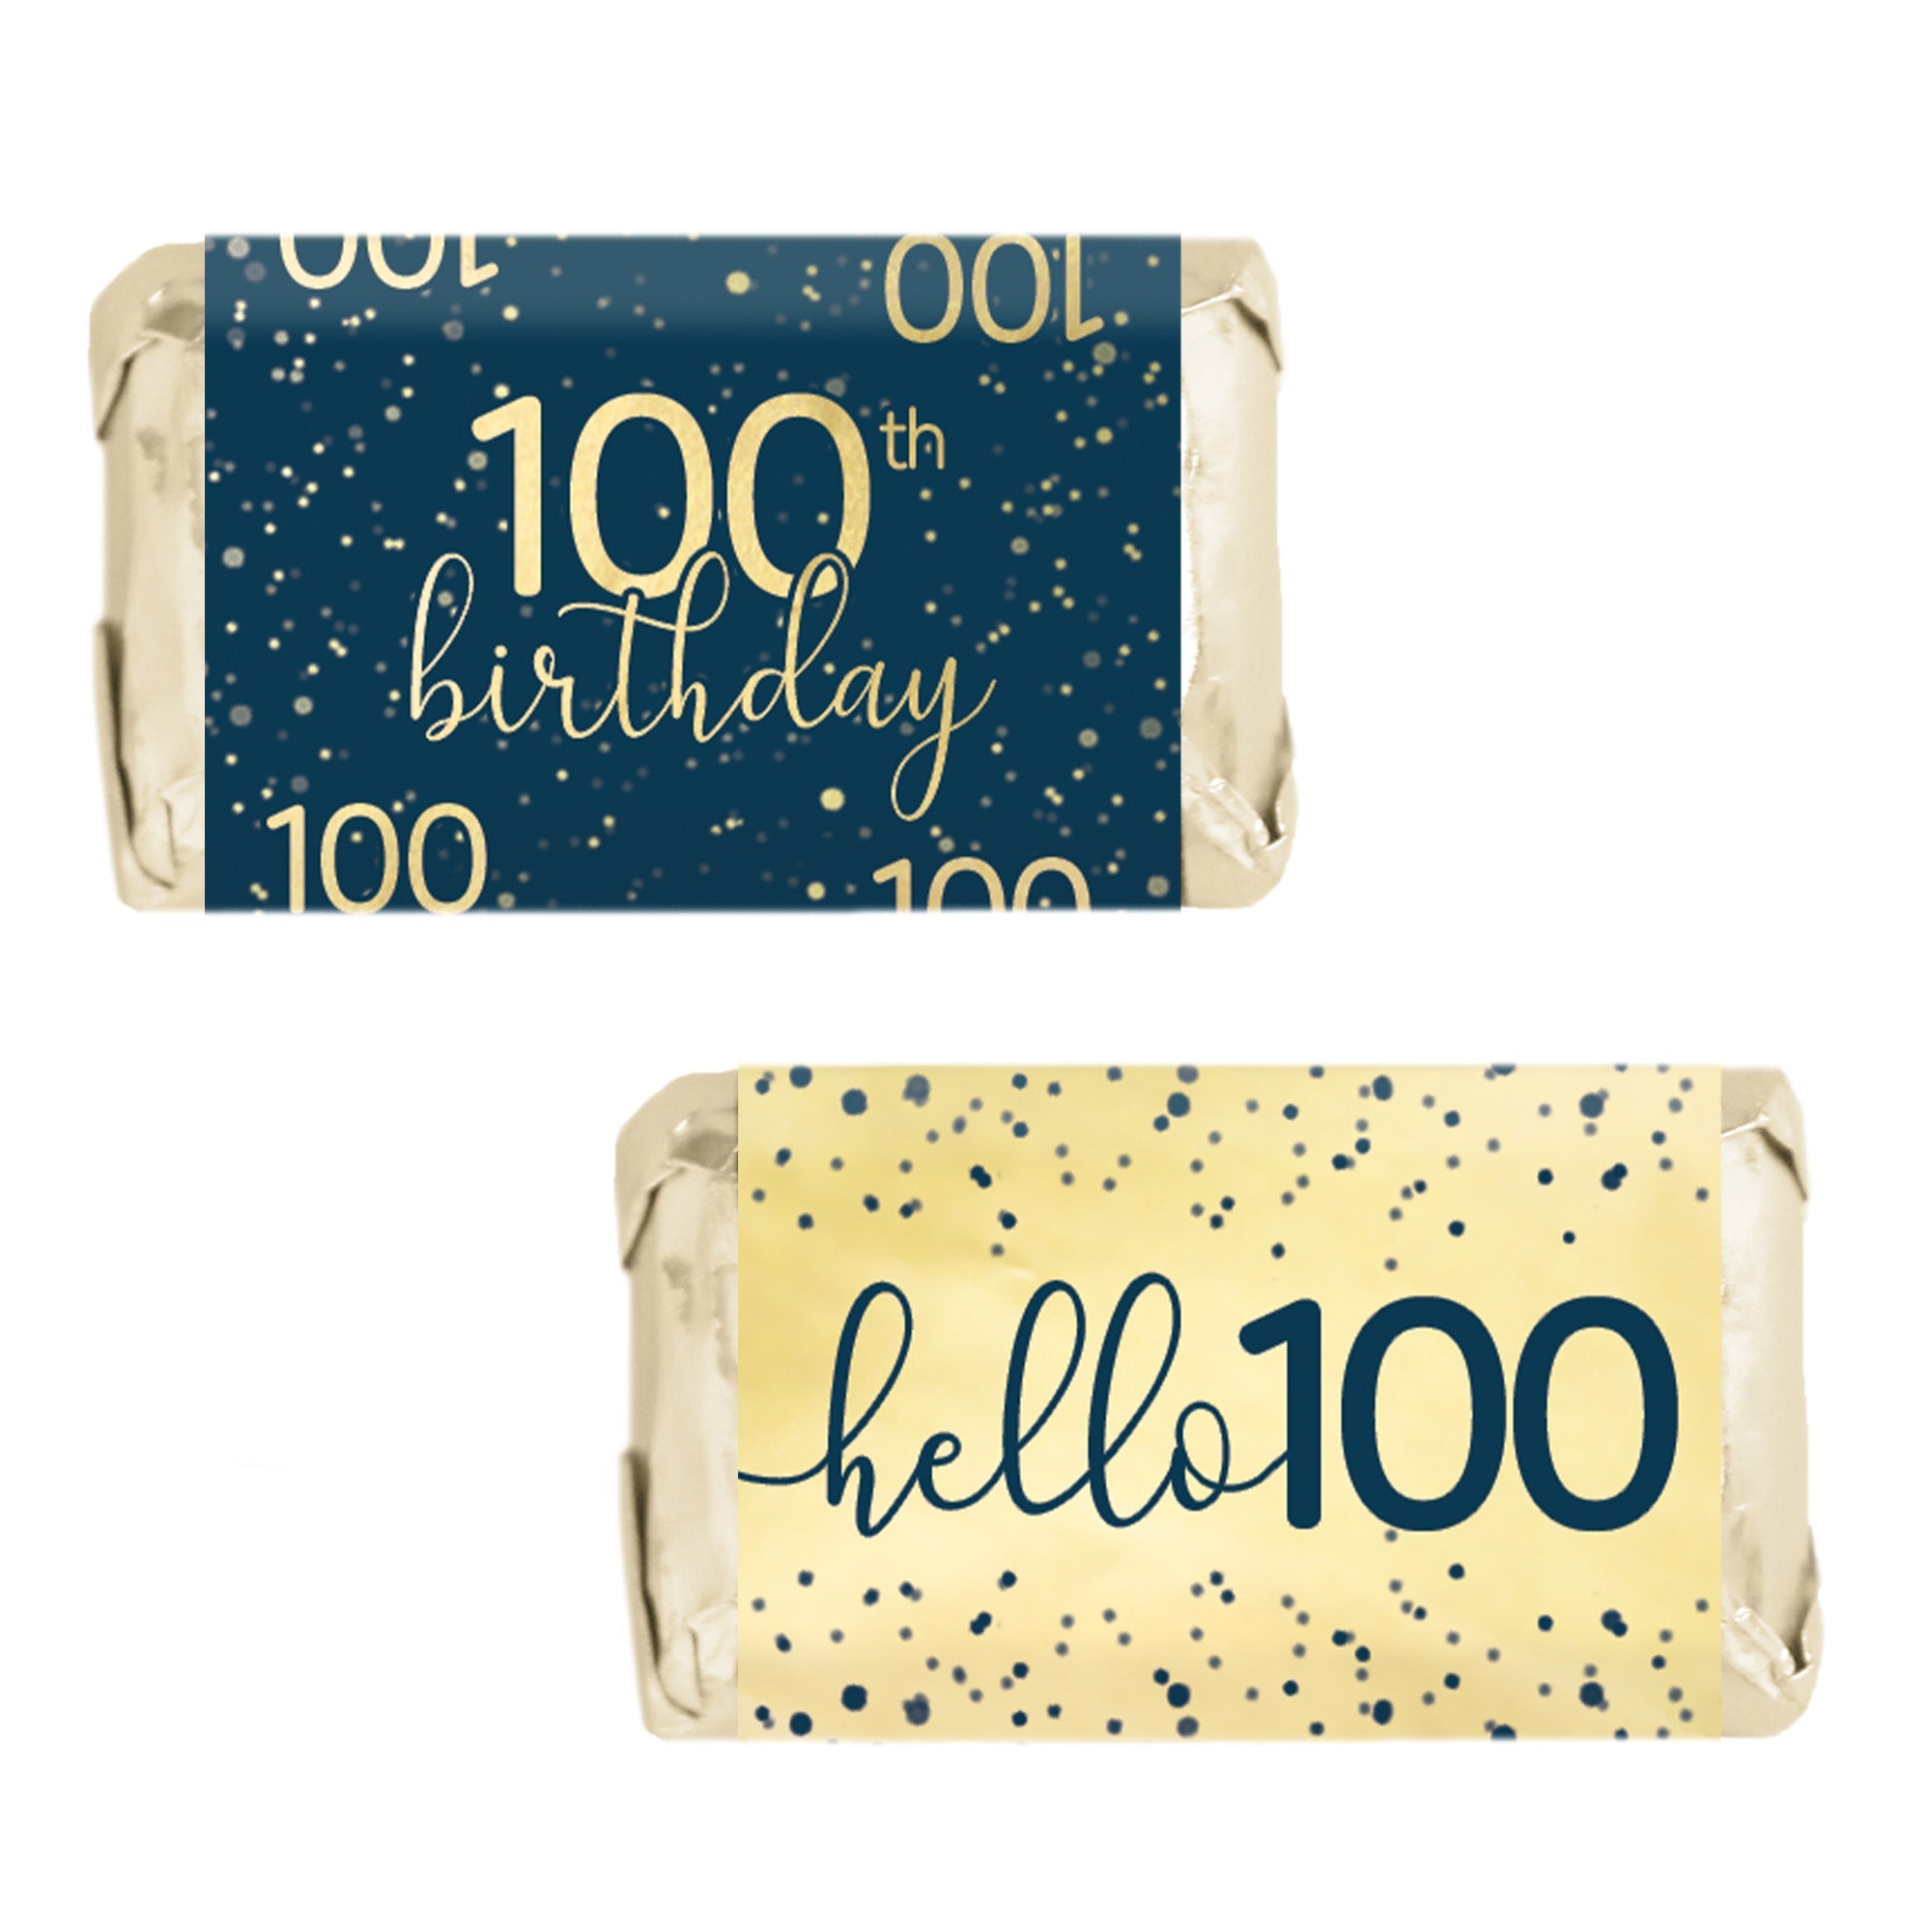 Navy Blue and Gold 100th Birthday Hershey's® Miniatures Candy Bar Wrappers Stickers